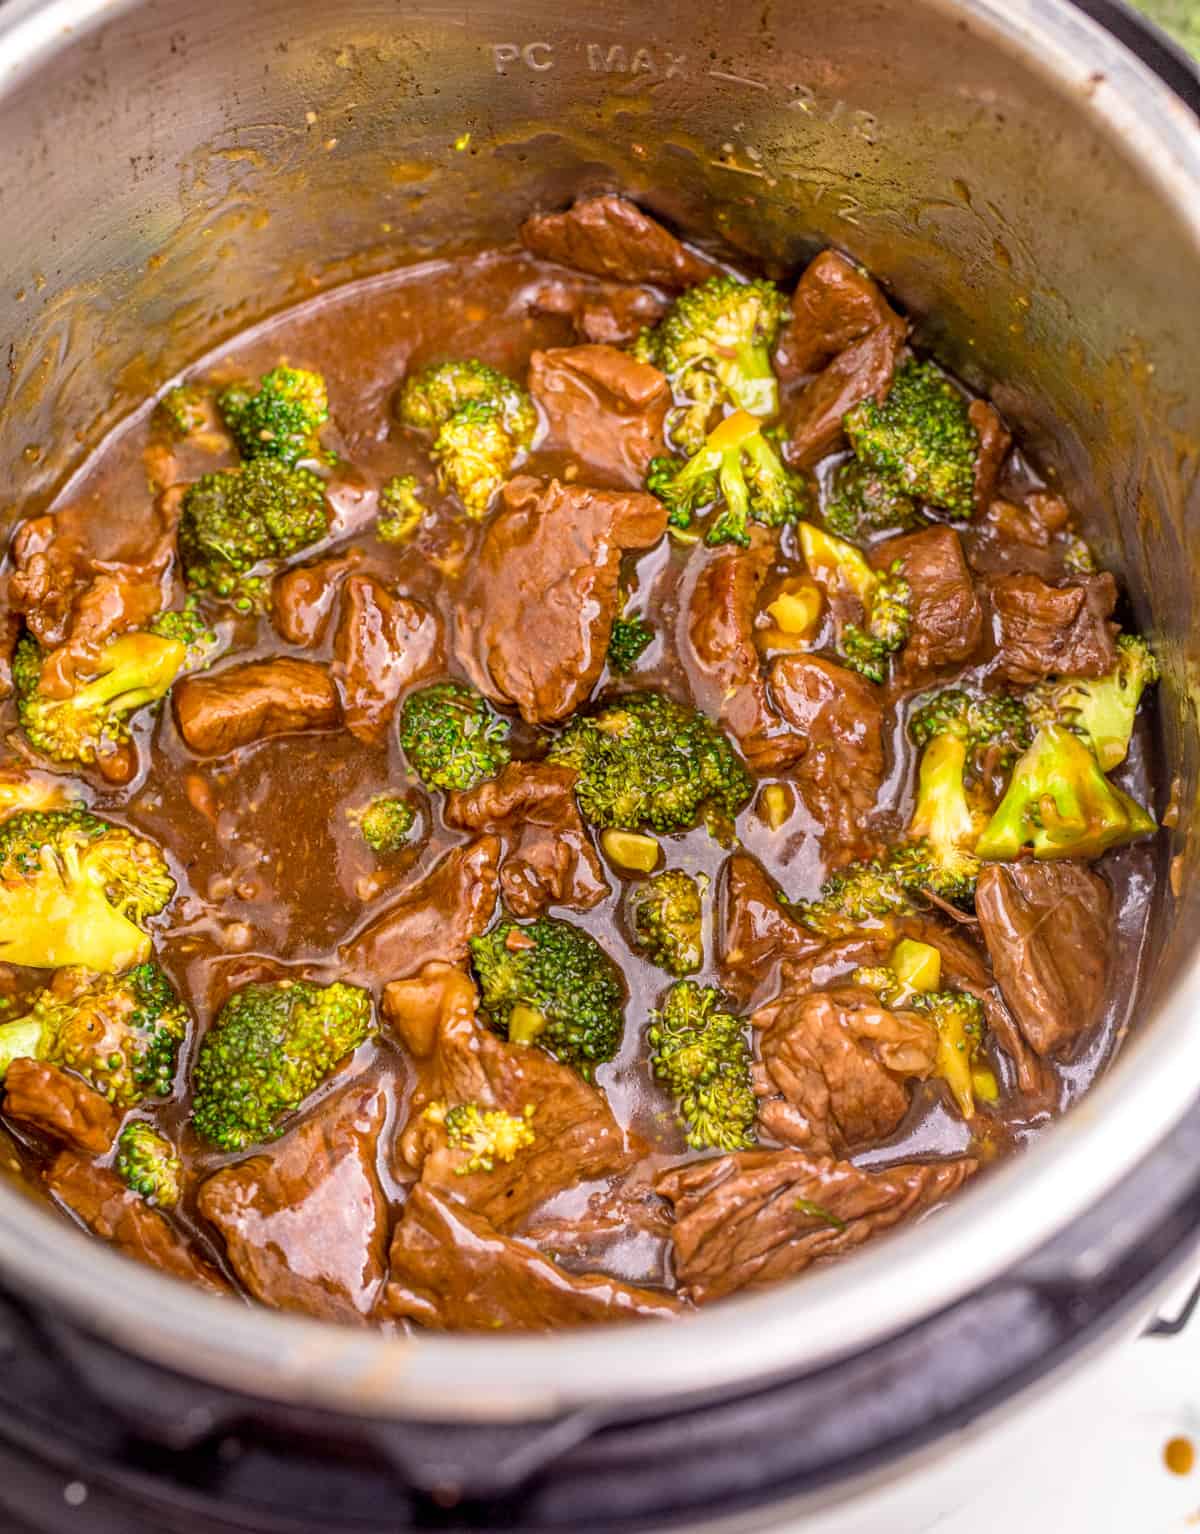 Finished Beef and Broccoli in basin of instant pot.